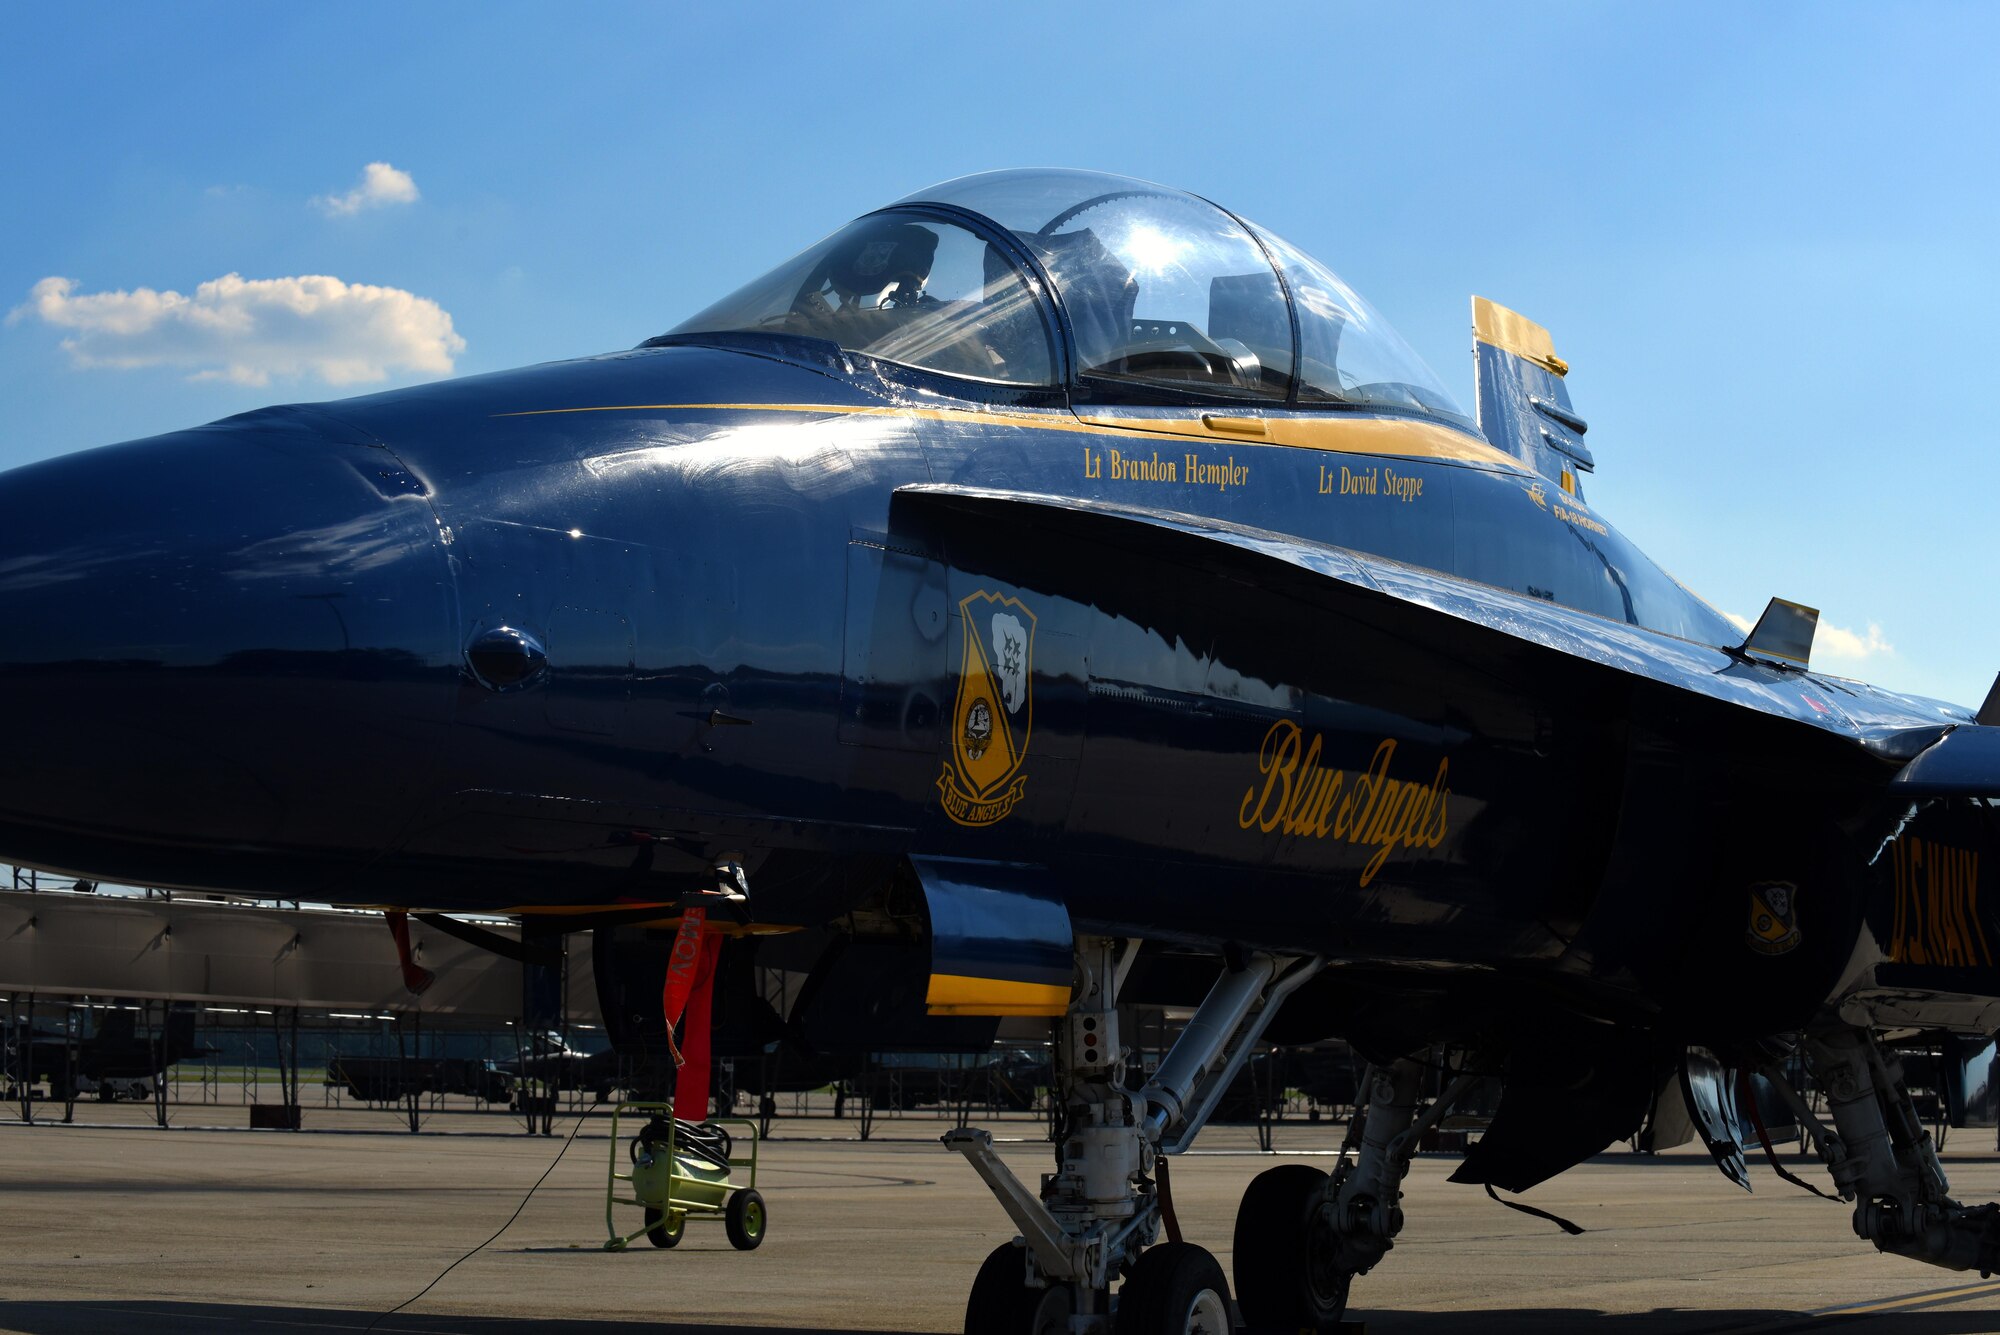 A U.S. Navy Blue Angels F/A-18 Hornet landed, May 17, 2017, at Seymour Johnson Air Force Base, North Carolina. The Blue Angels arrived three days prior to the Wings Over Wayne Air Show to practice their performance and engage with the local community. (U.S. Air Force photo by Senior Airman Ashley Maldonado)